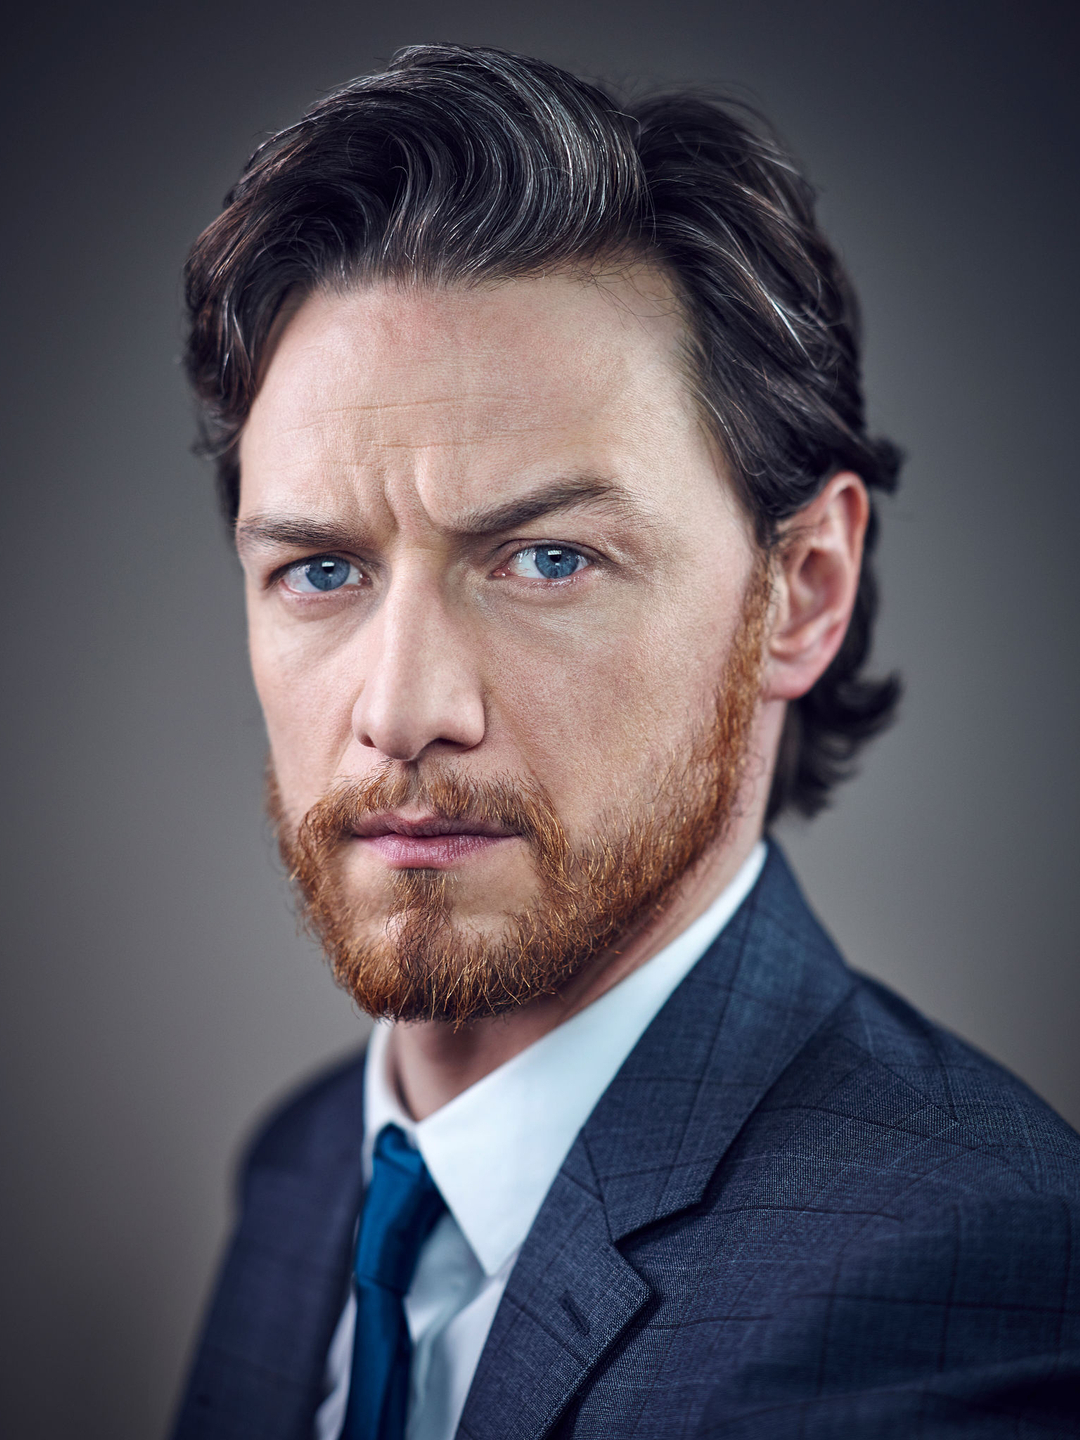 James McAvoy life story